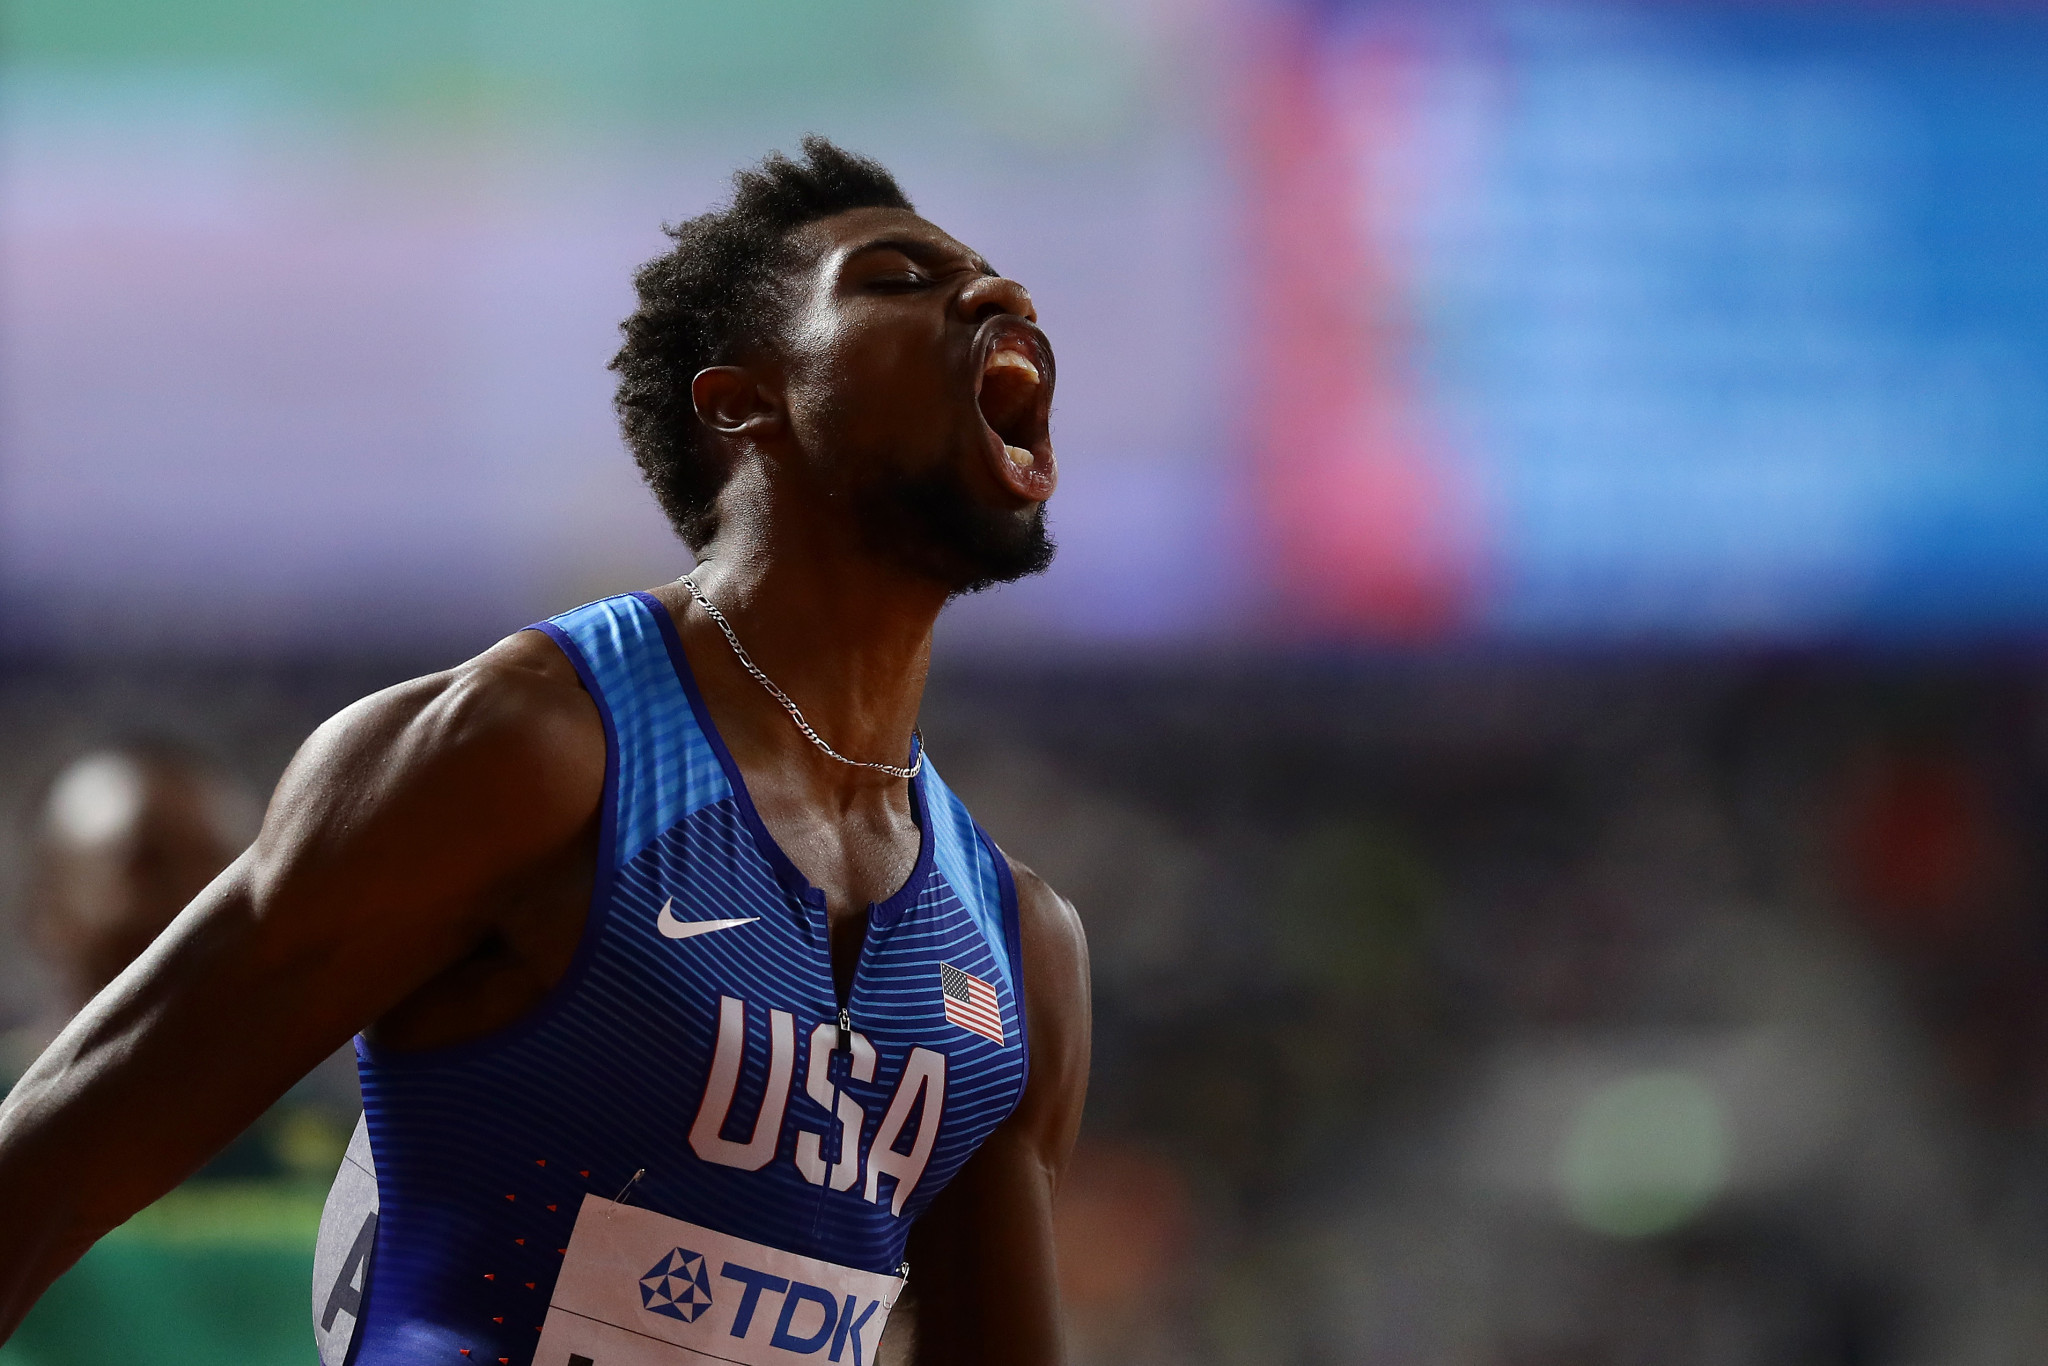 Noah Lyles donated some of his kit from the 2019 World Championships in Doha to the World Athletics Heritage Collection ©Getty Images